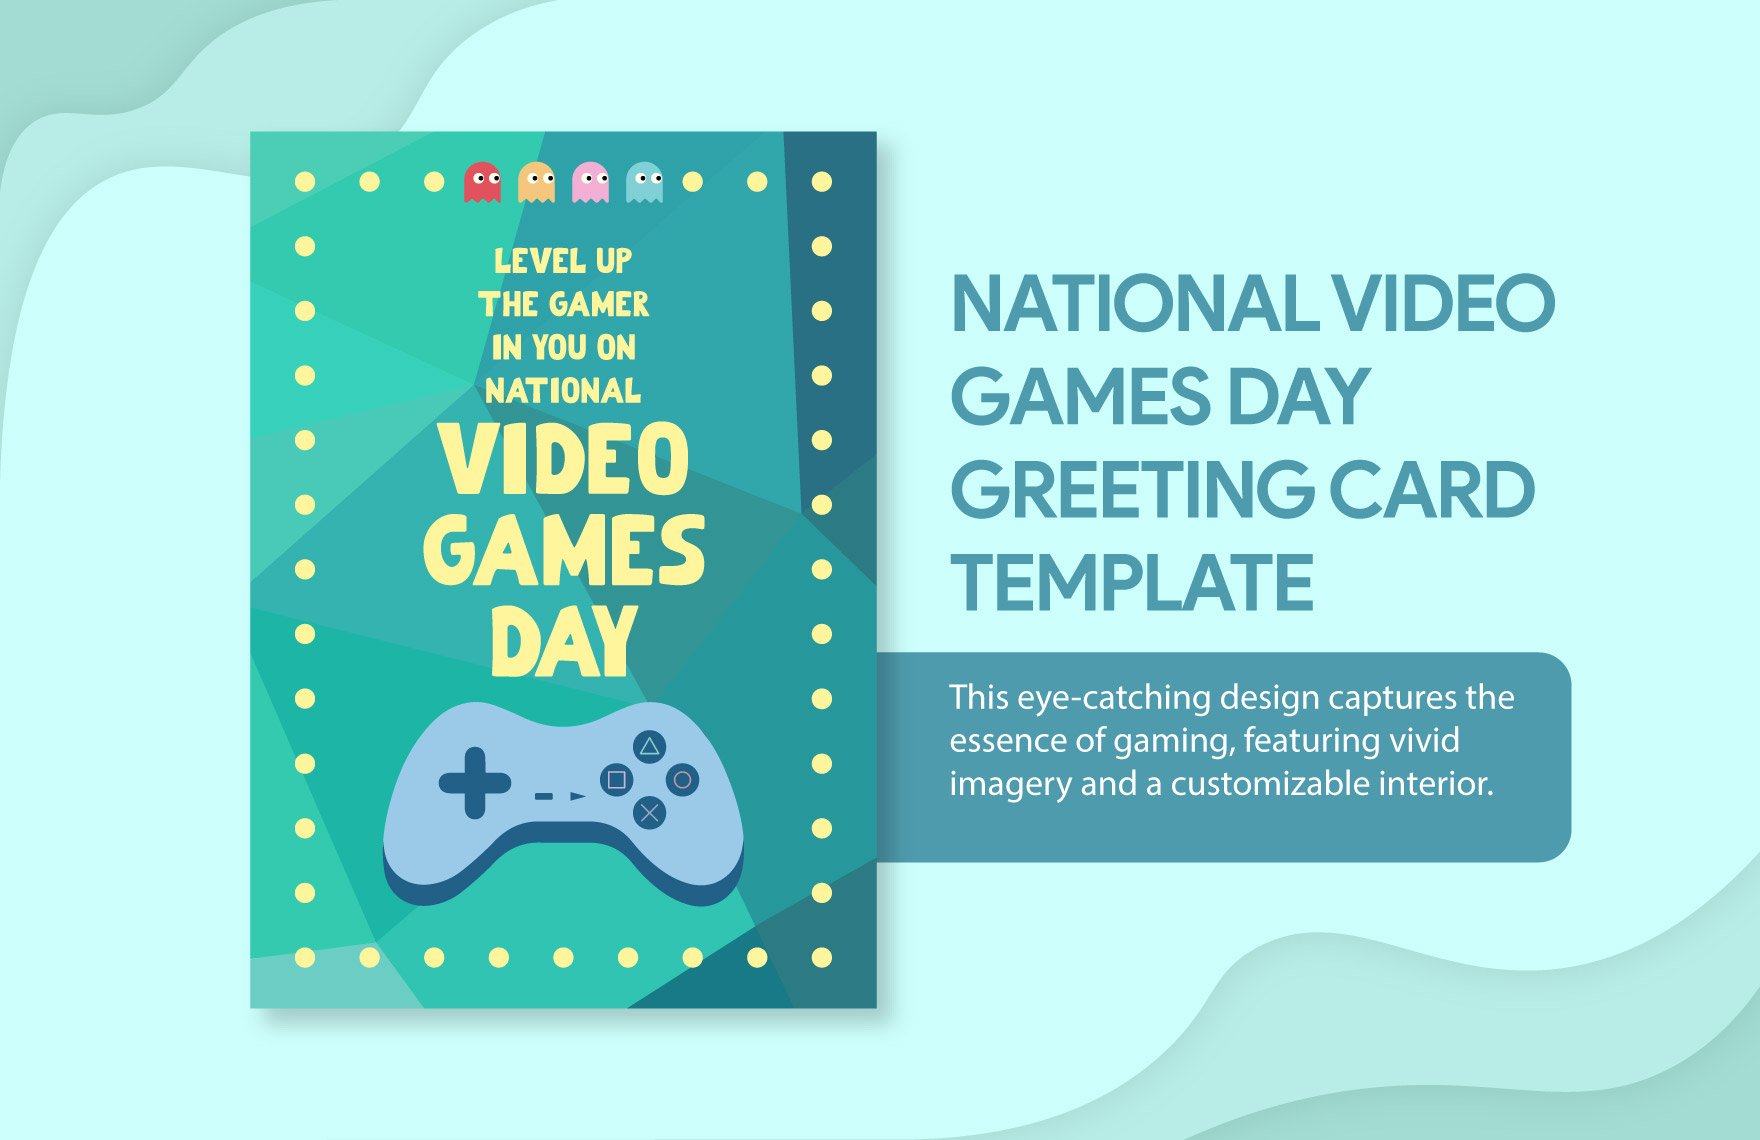 National Video Games Day Greeting Card Template